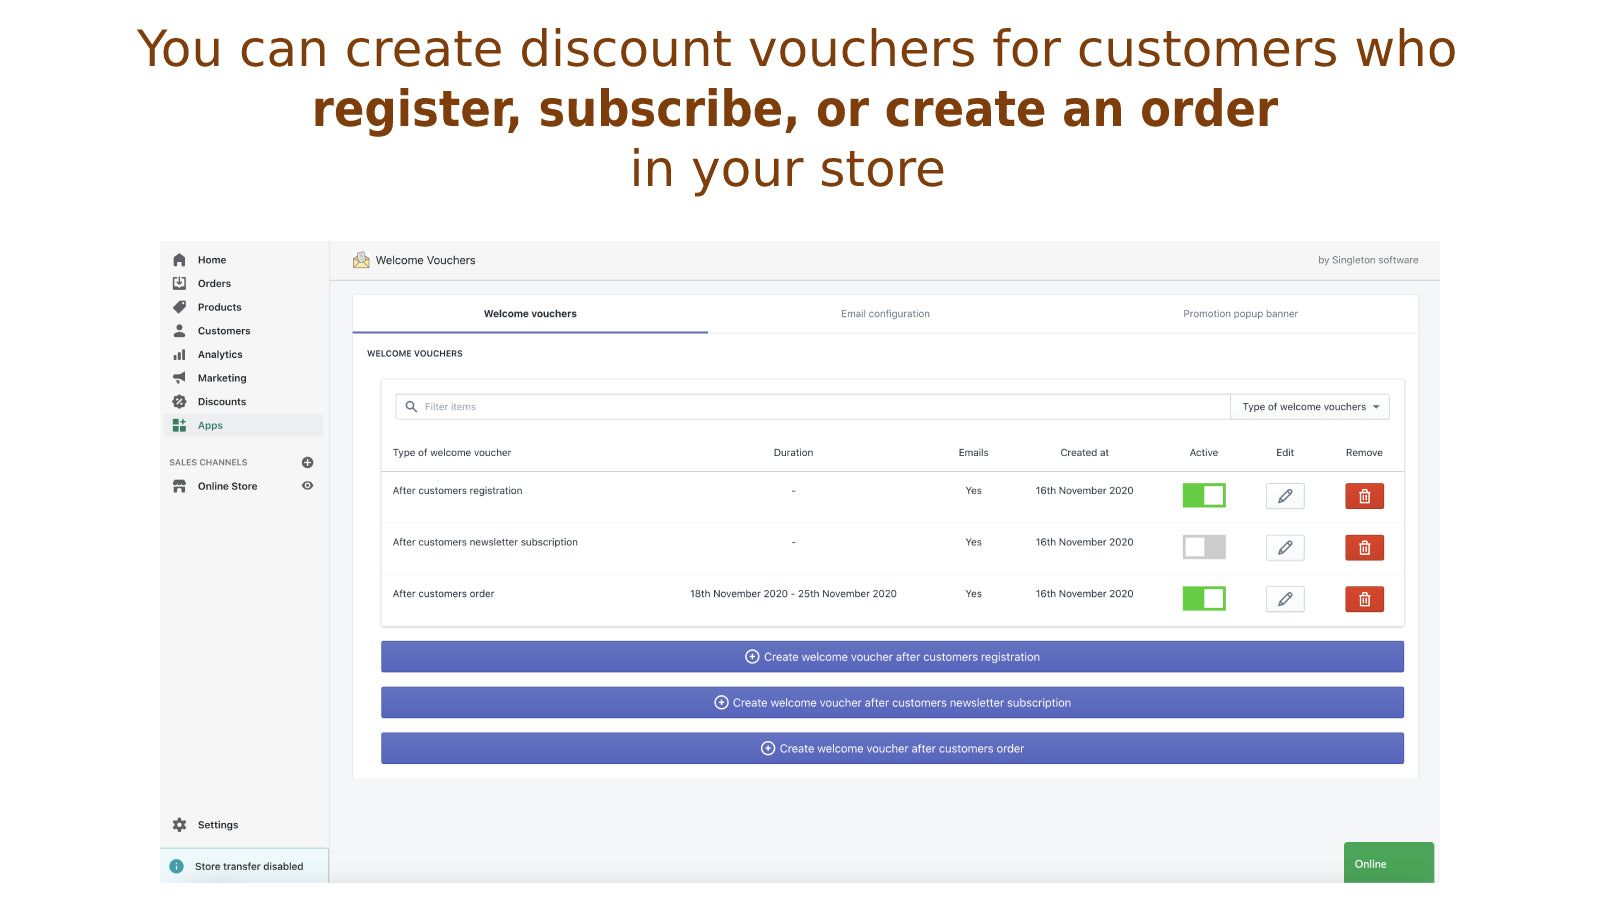 Discount for customers who register, subscribe or create order